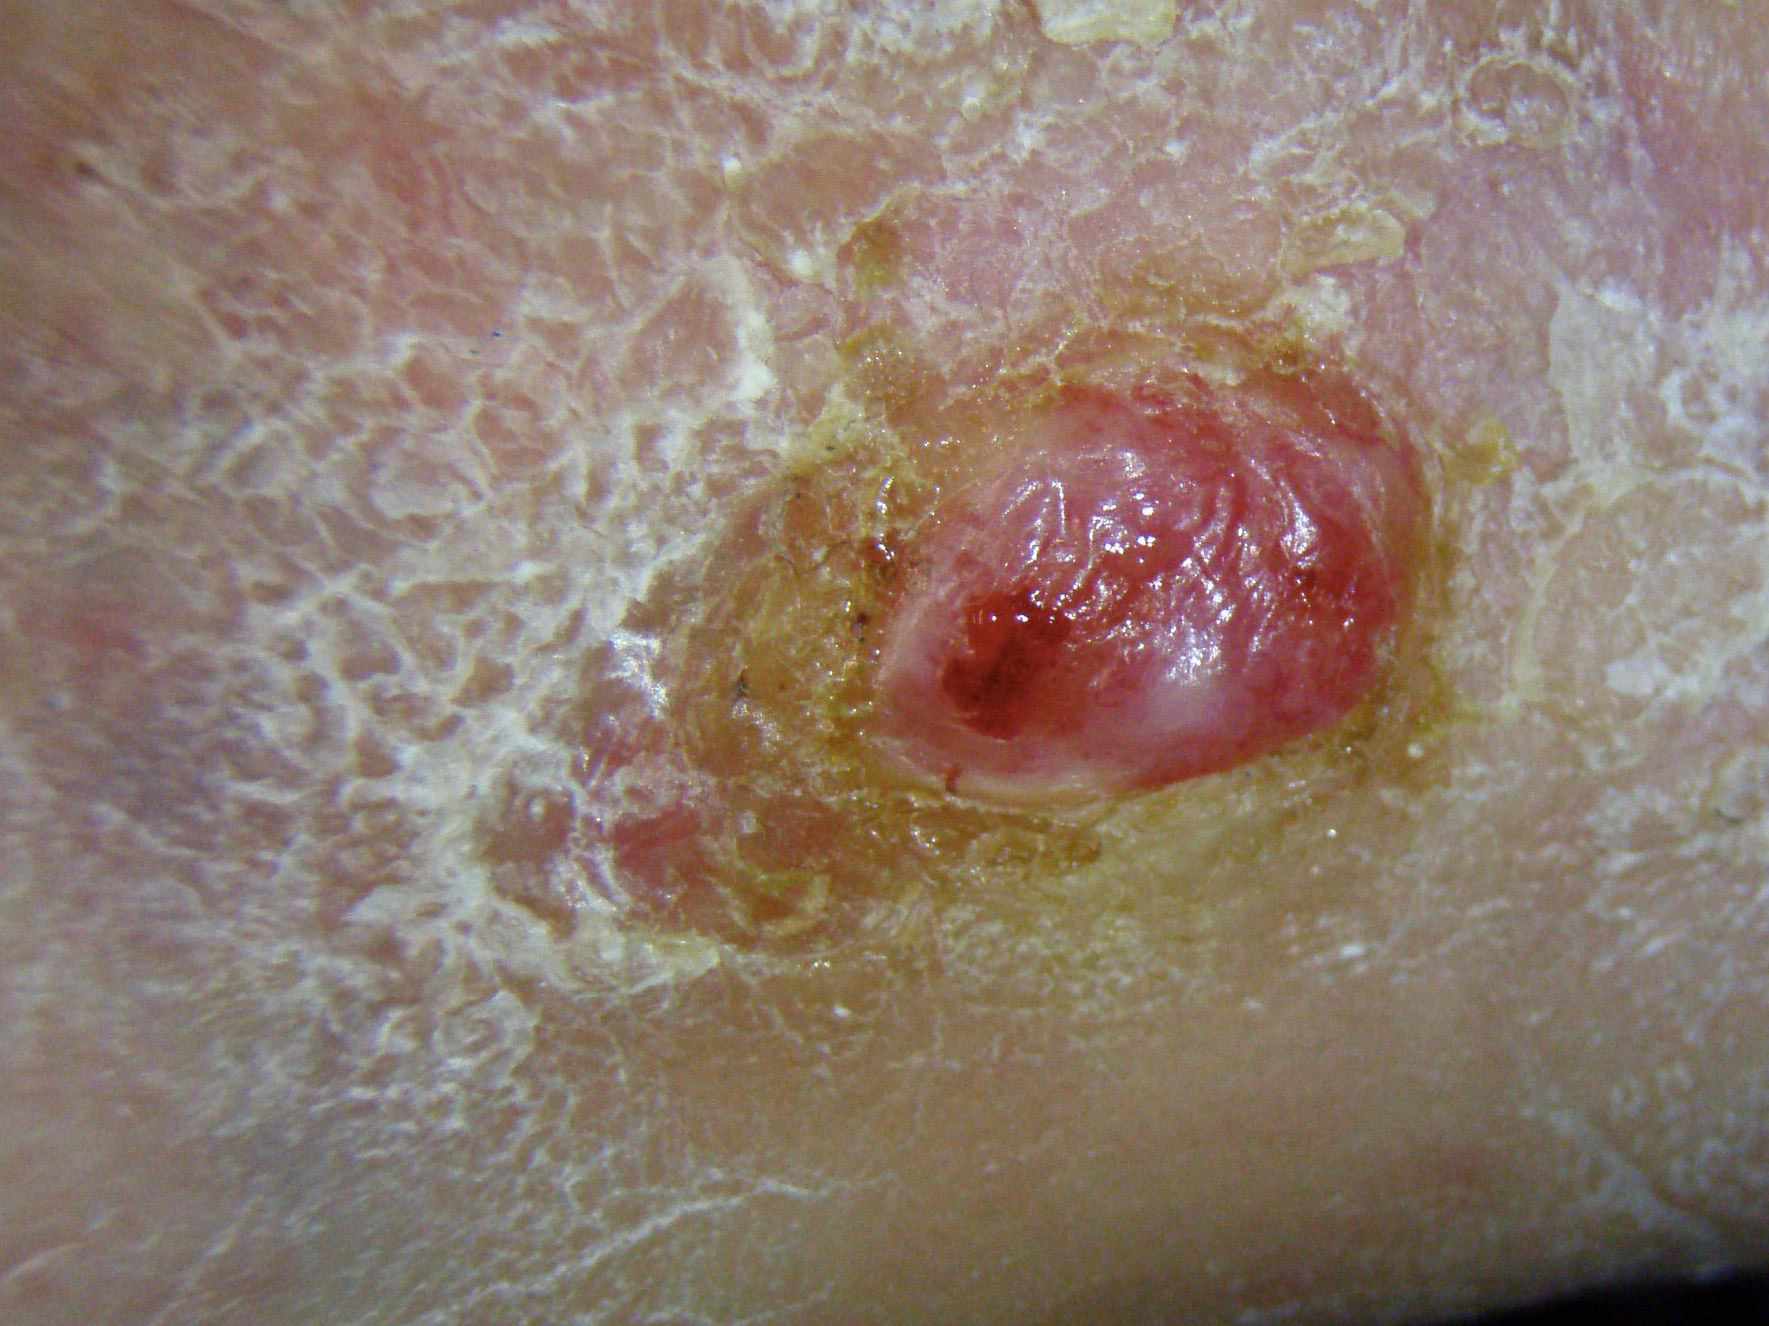 Skin Cancer: Overview and More